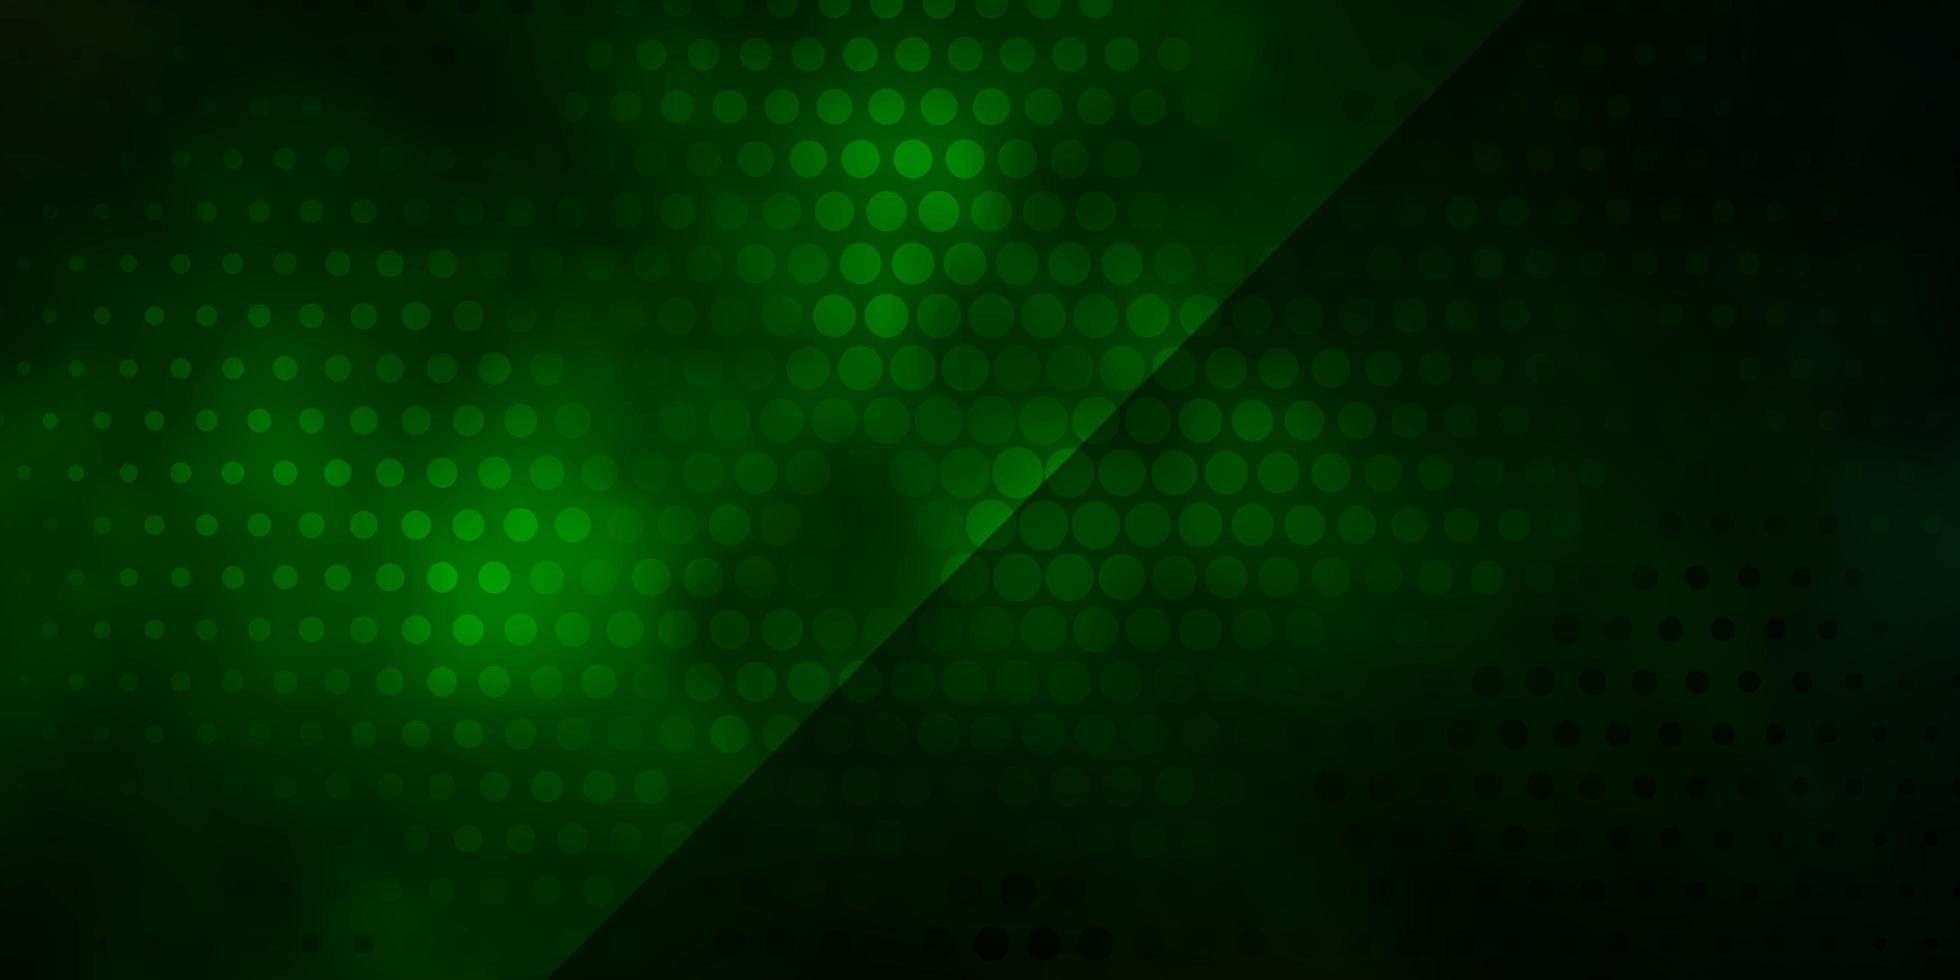 Dark Green, Red vector background with circles.